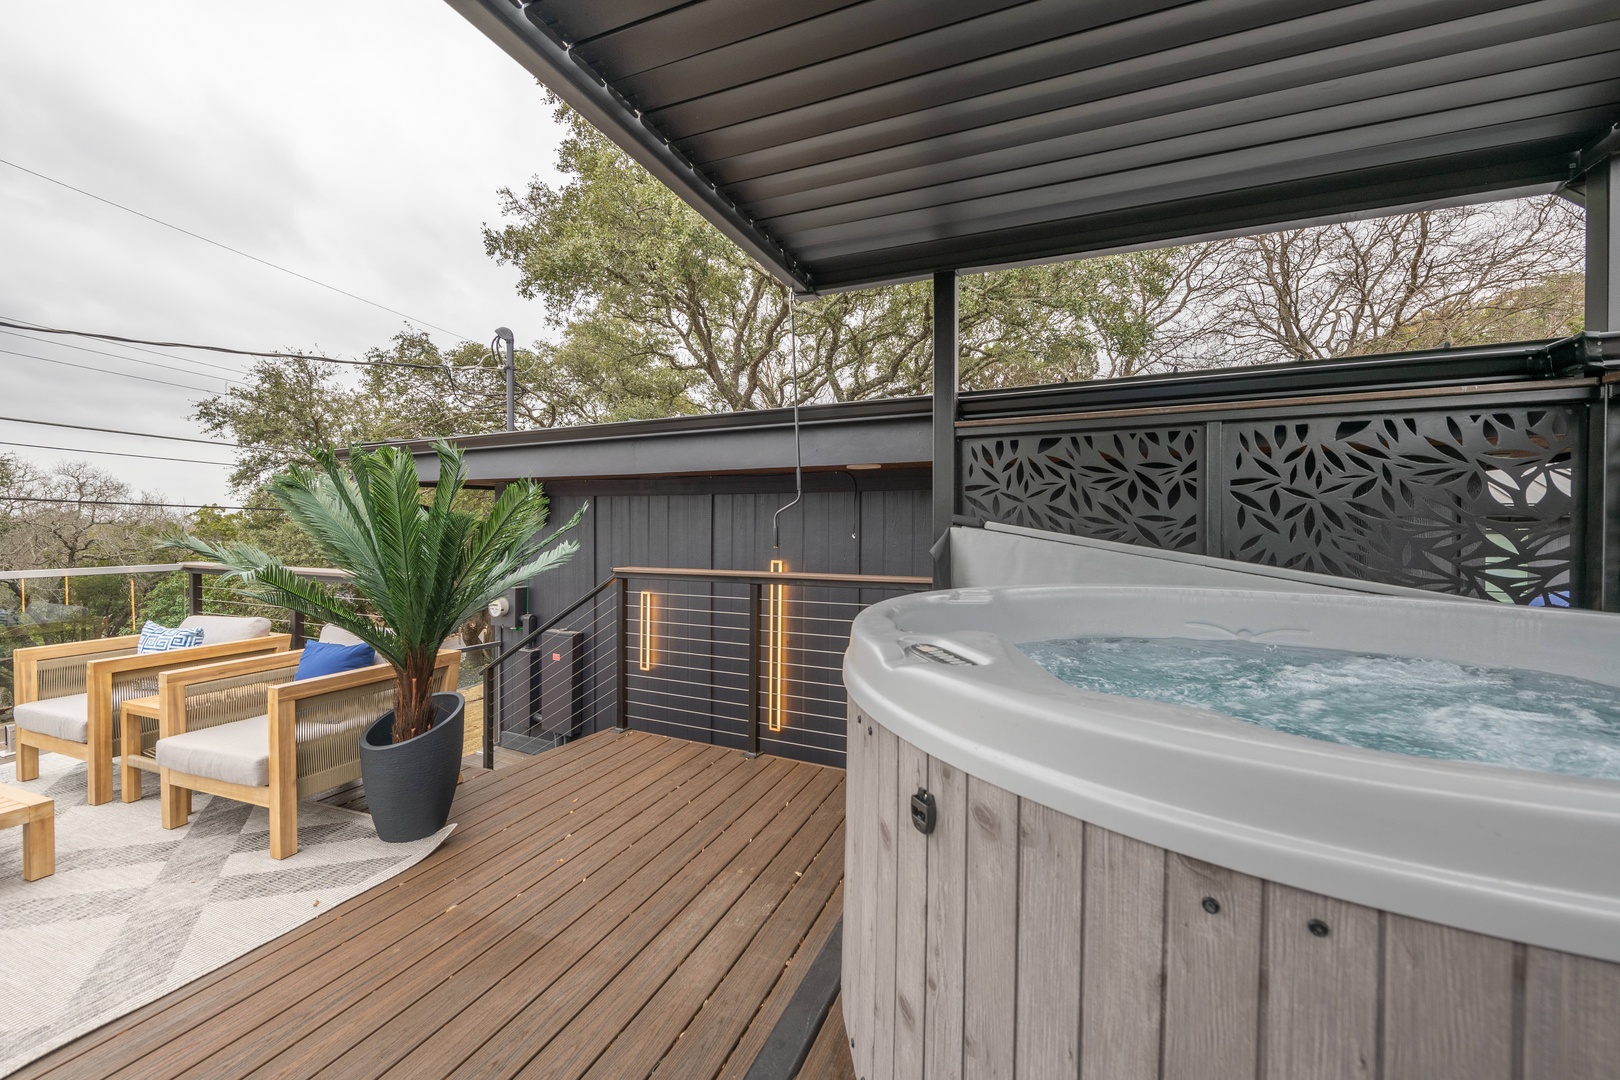 Back deck with outdoor seating & hot tub